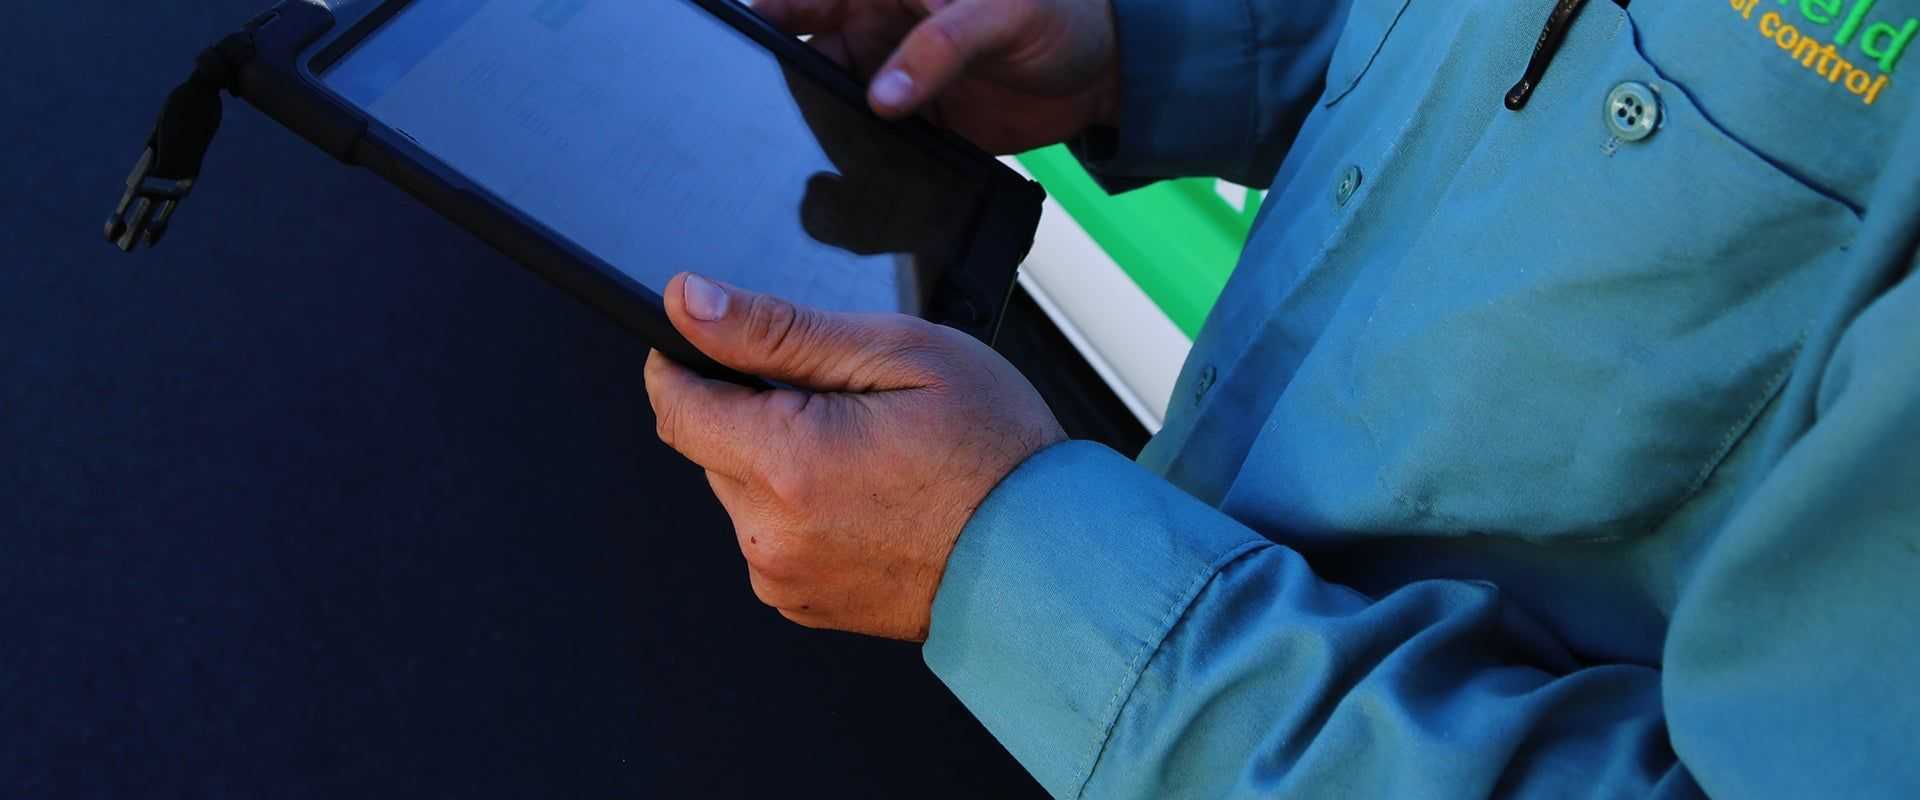 tech holding a tablet